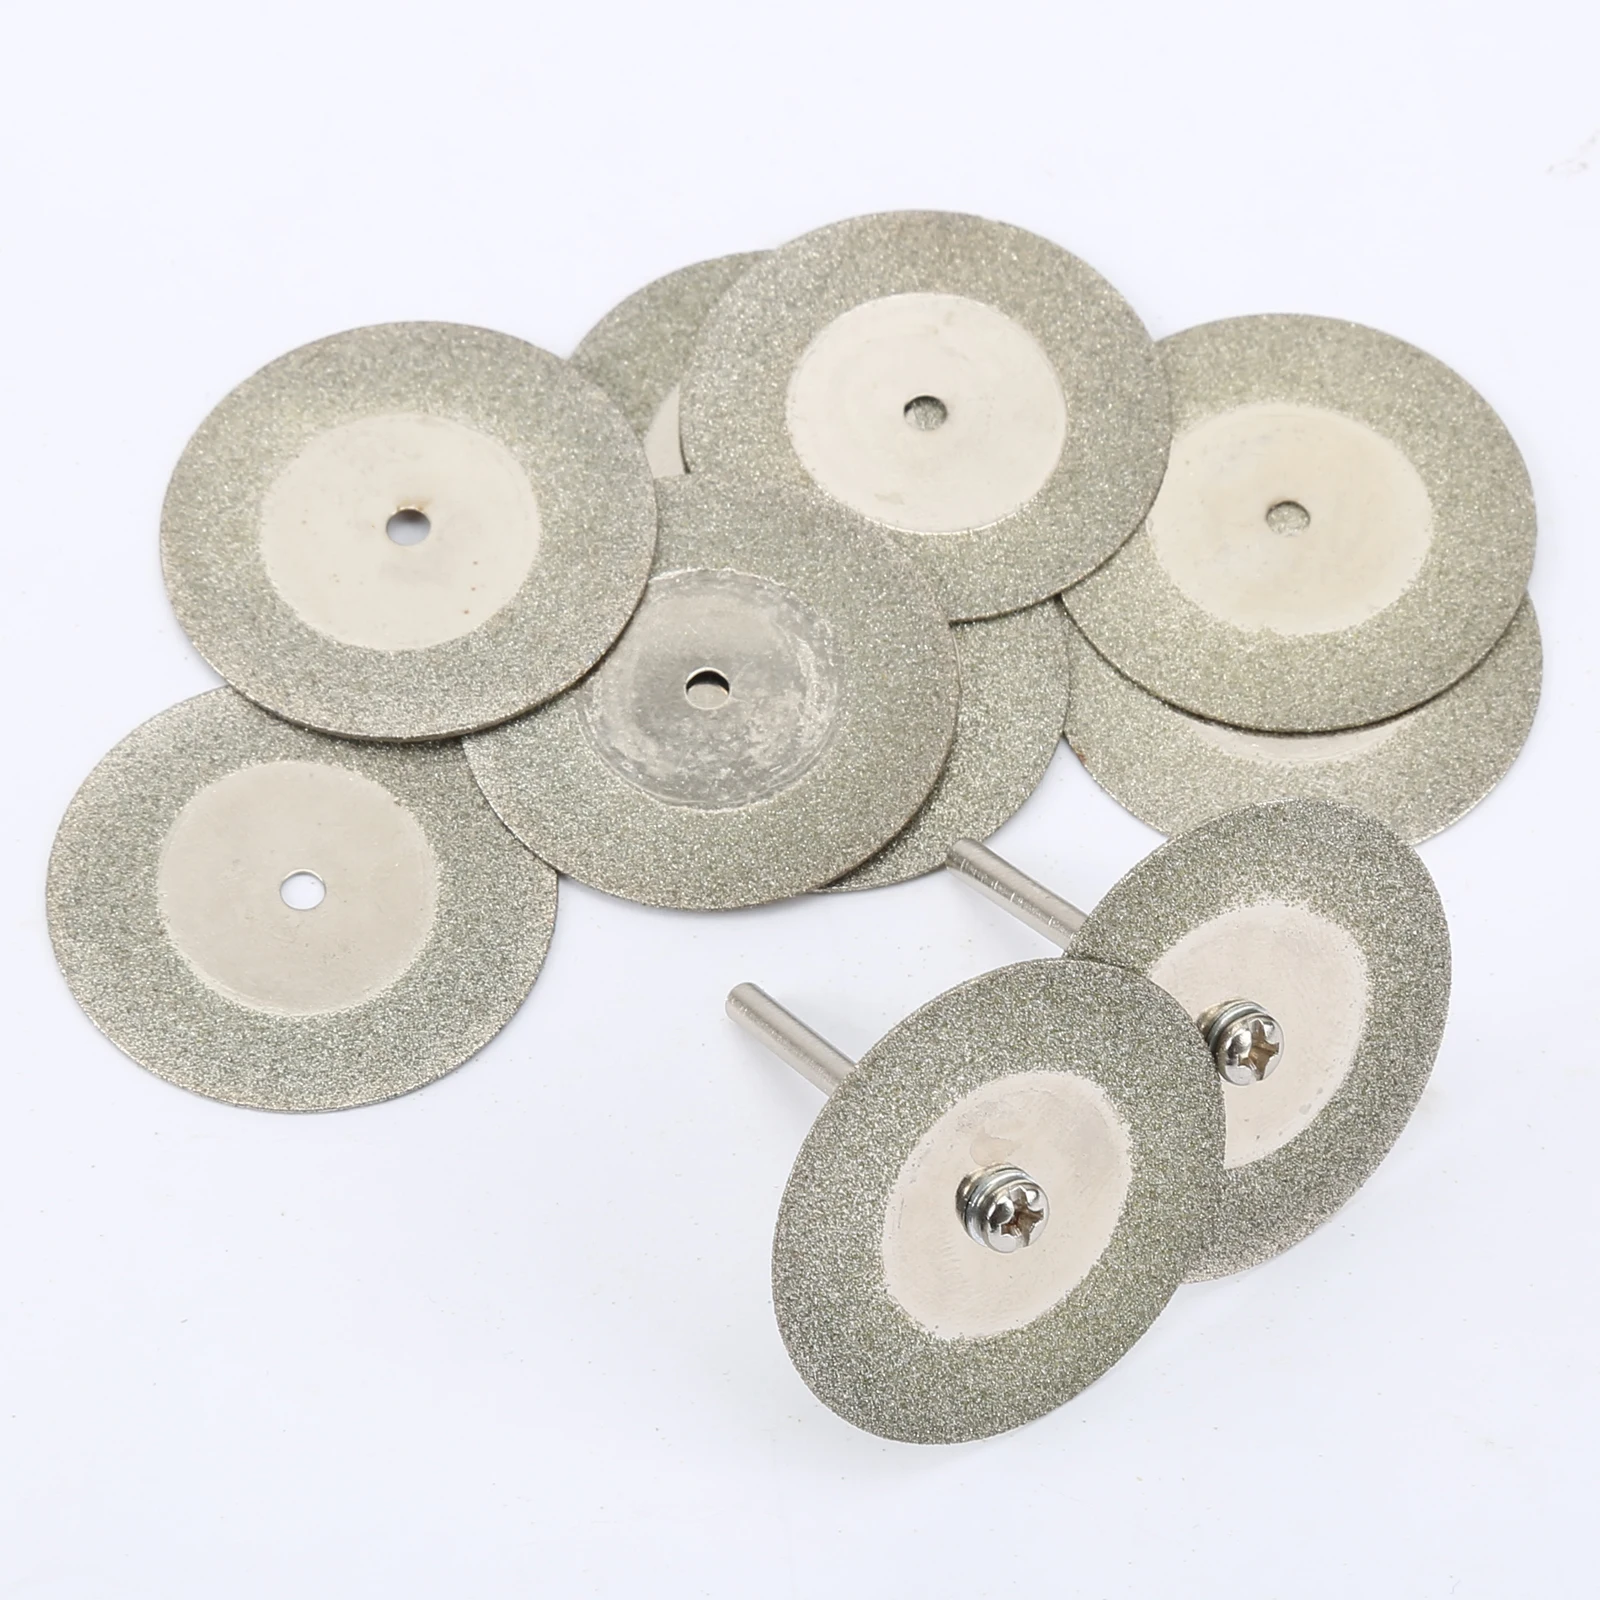 

10pcs 35mm Stone Jade Glass Diamond Cutting Disc Saw Blabe Fit for Dremel Rotary Tool With Two Mandrel Dremel Accessories